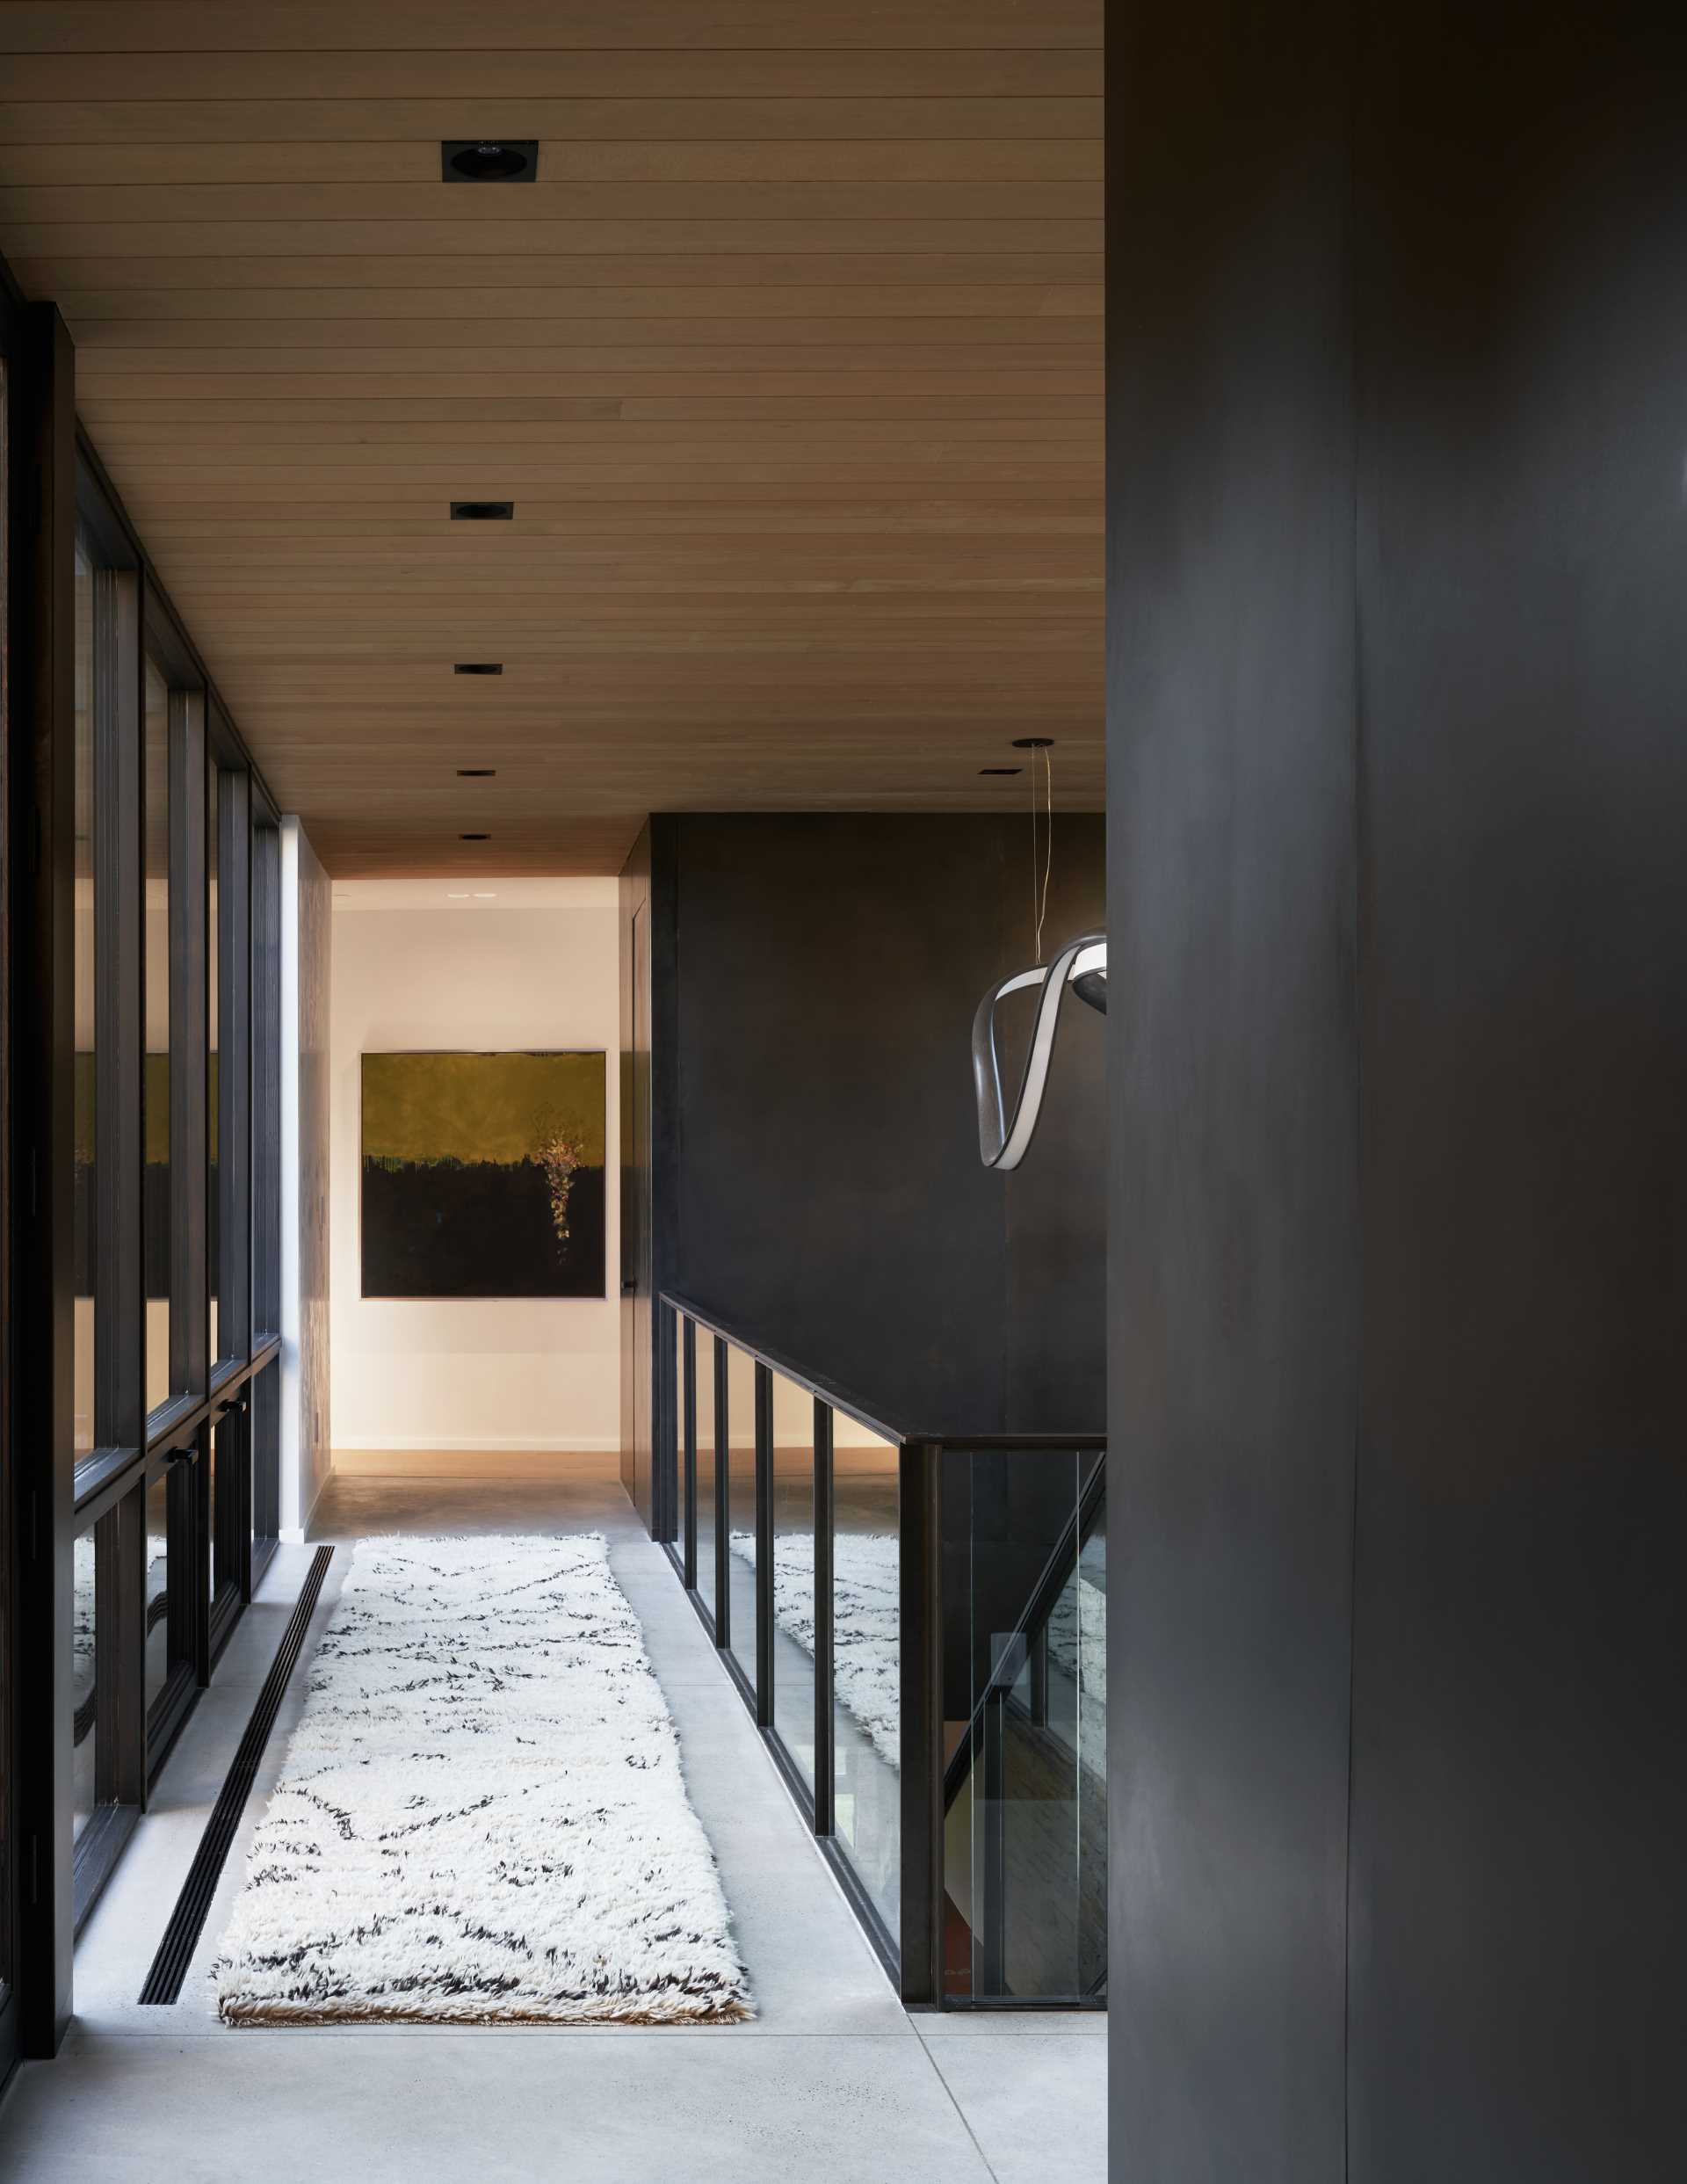 A double-sided glass corridor on the upper level connects various areas of the home, creating a transparent zone in the home’s core and inviting the outside in.